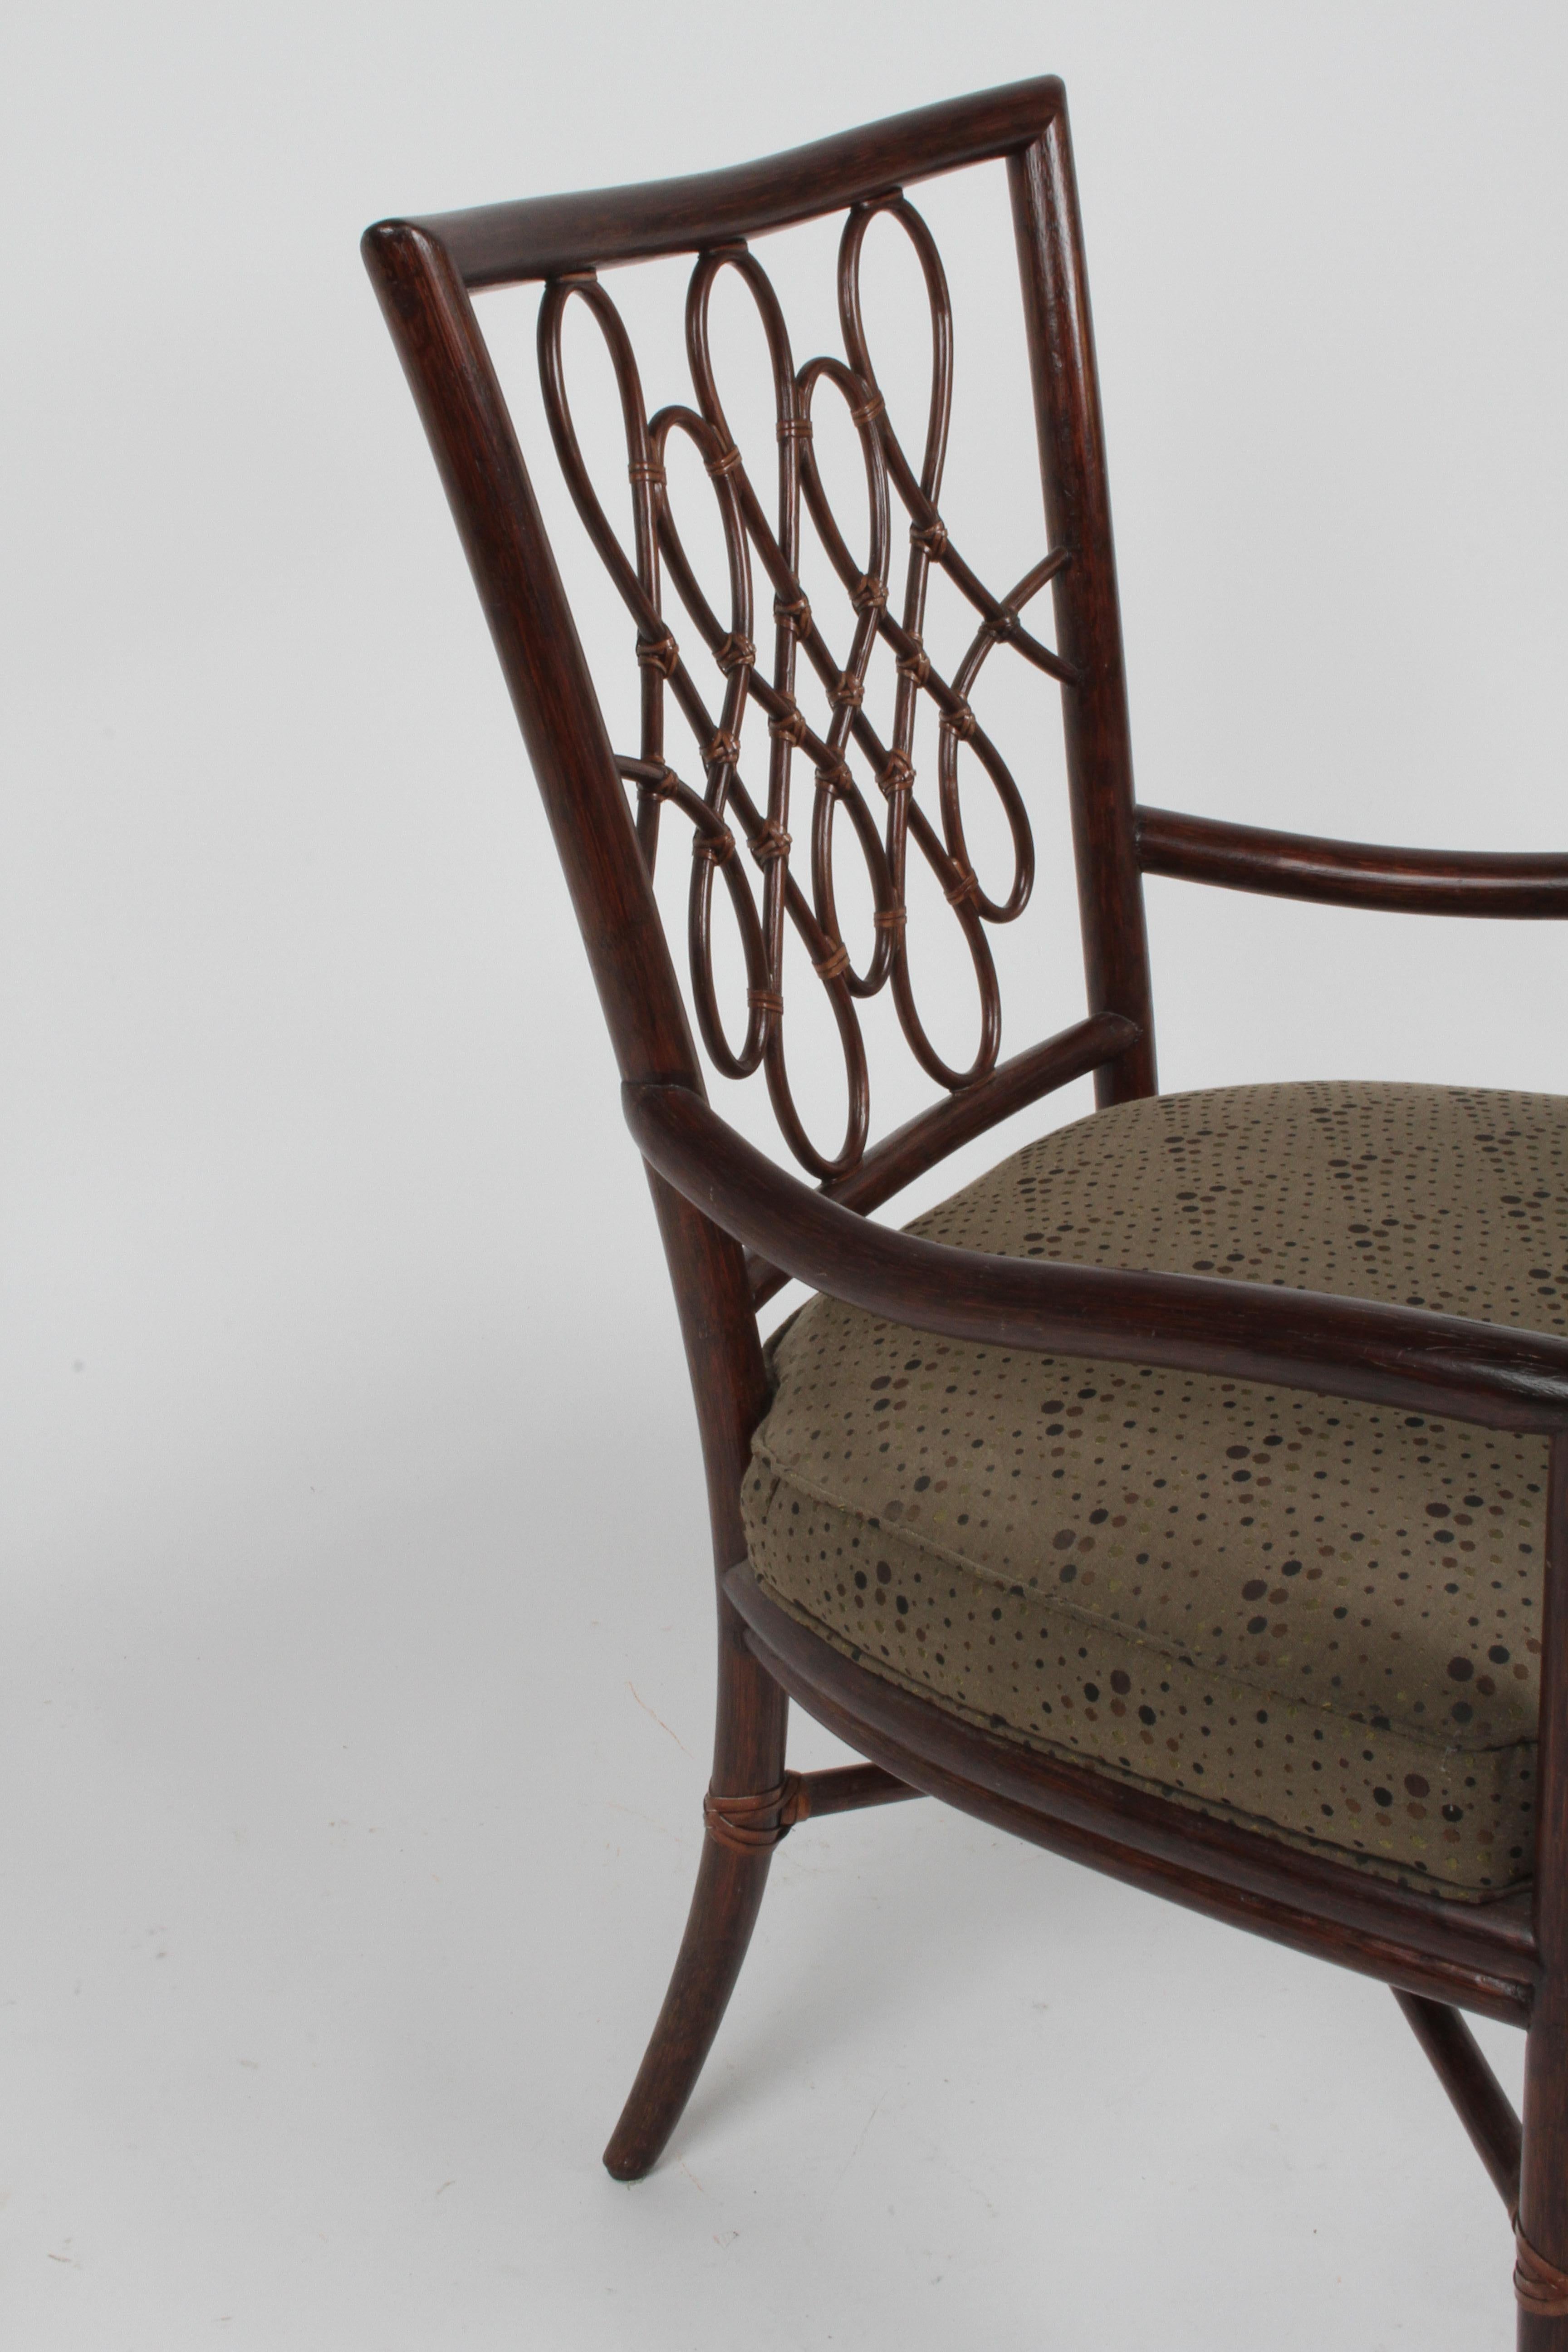 Contemporary Barbara Barry for McGuire Rattan or Wicker Arm Desk, Dining or Occasional Chair For Sale